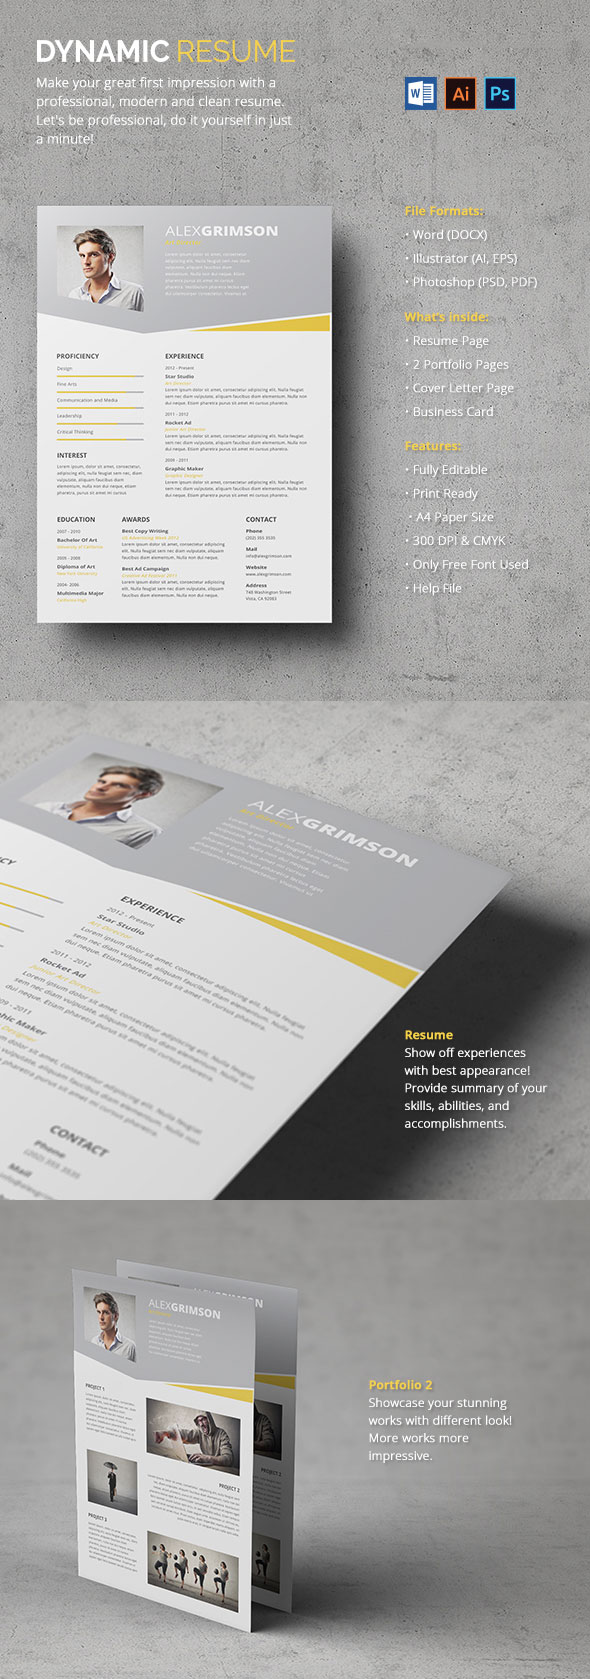 Dynamic Resume - With Portfolio Pages Included